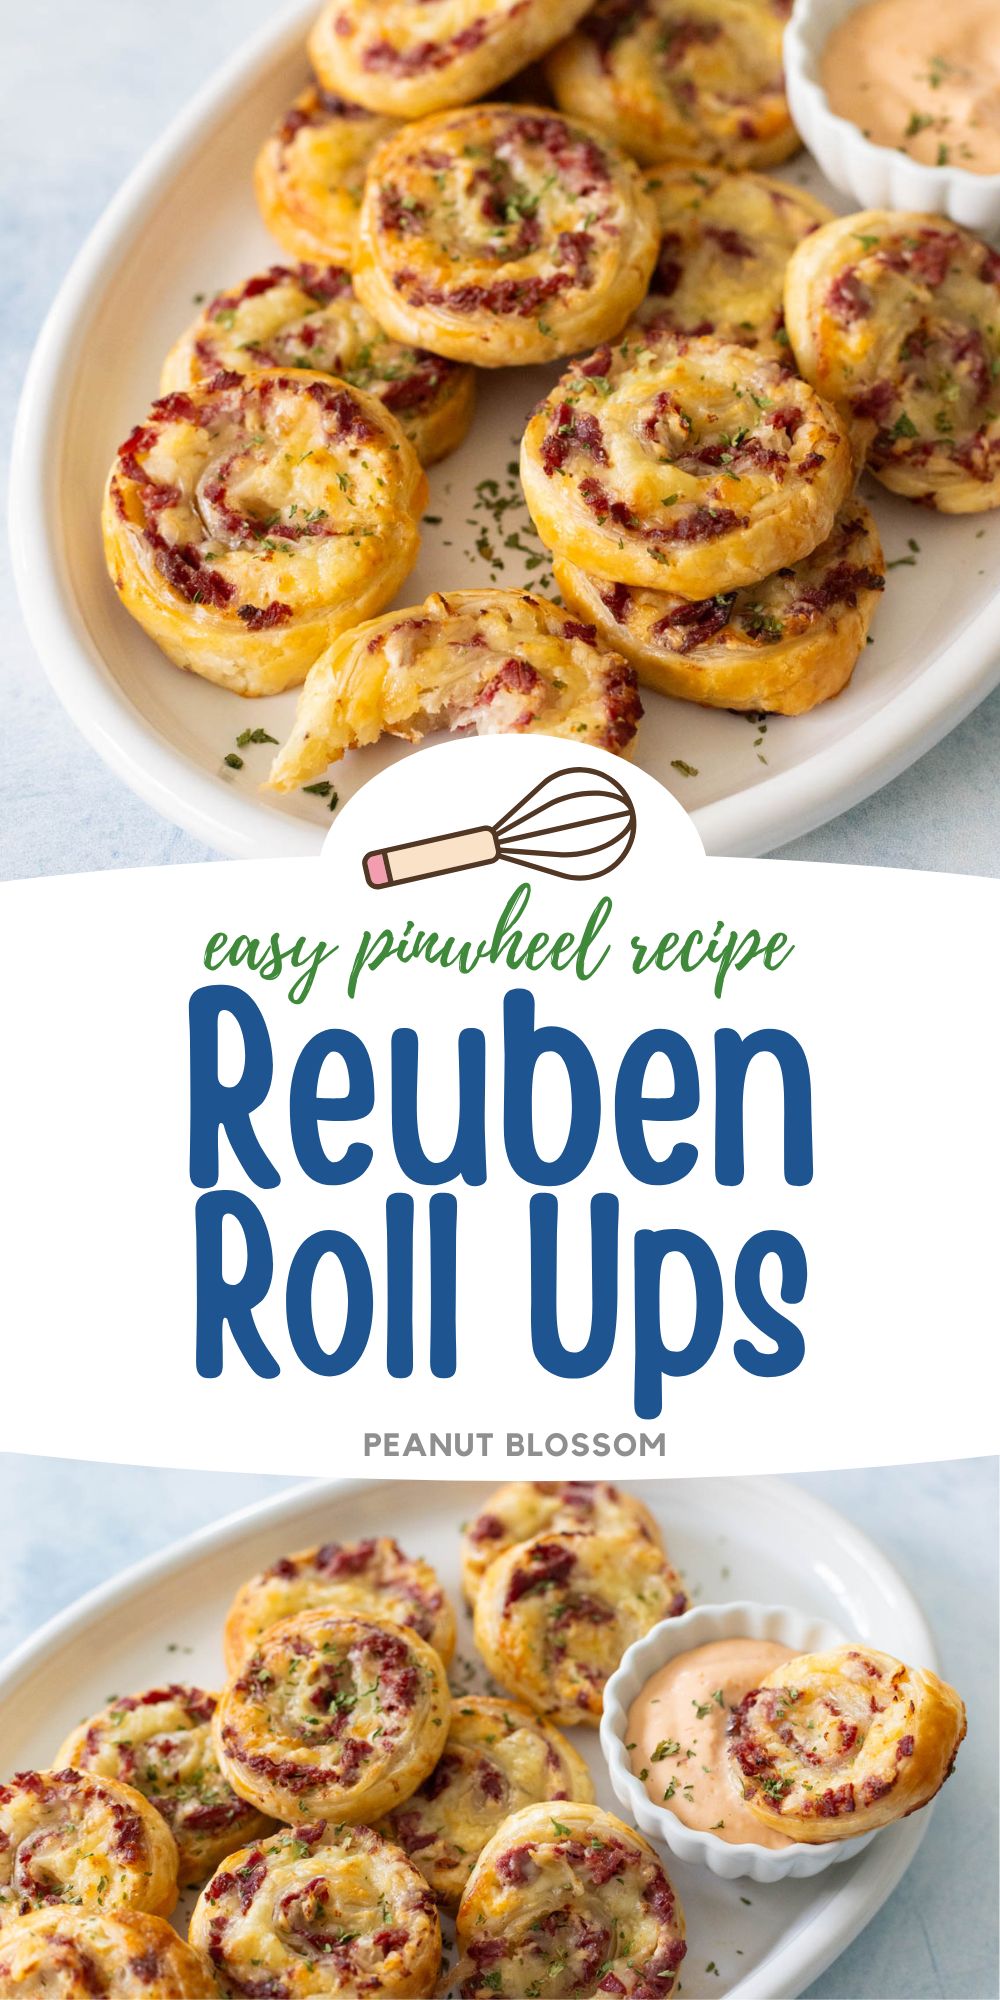 A photo collage shows the reuben roll ups from two angles so you can see the texture of the puff pastry and chunks of filling.